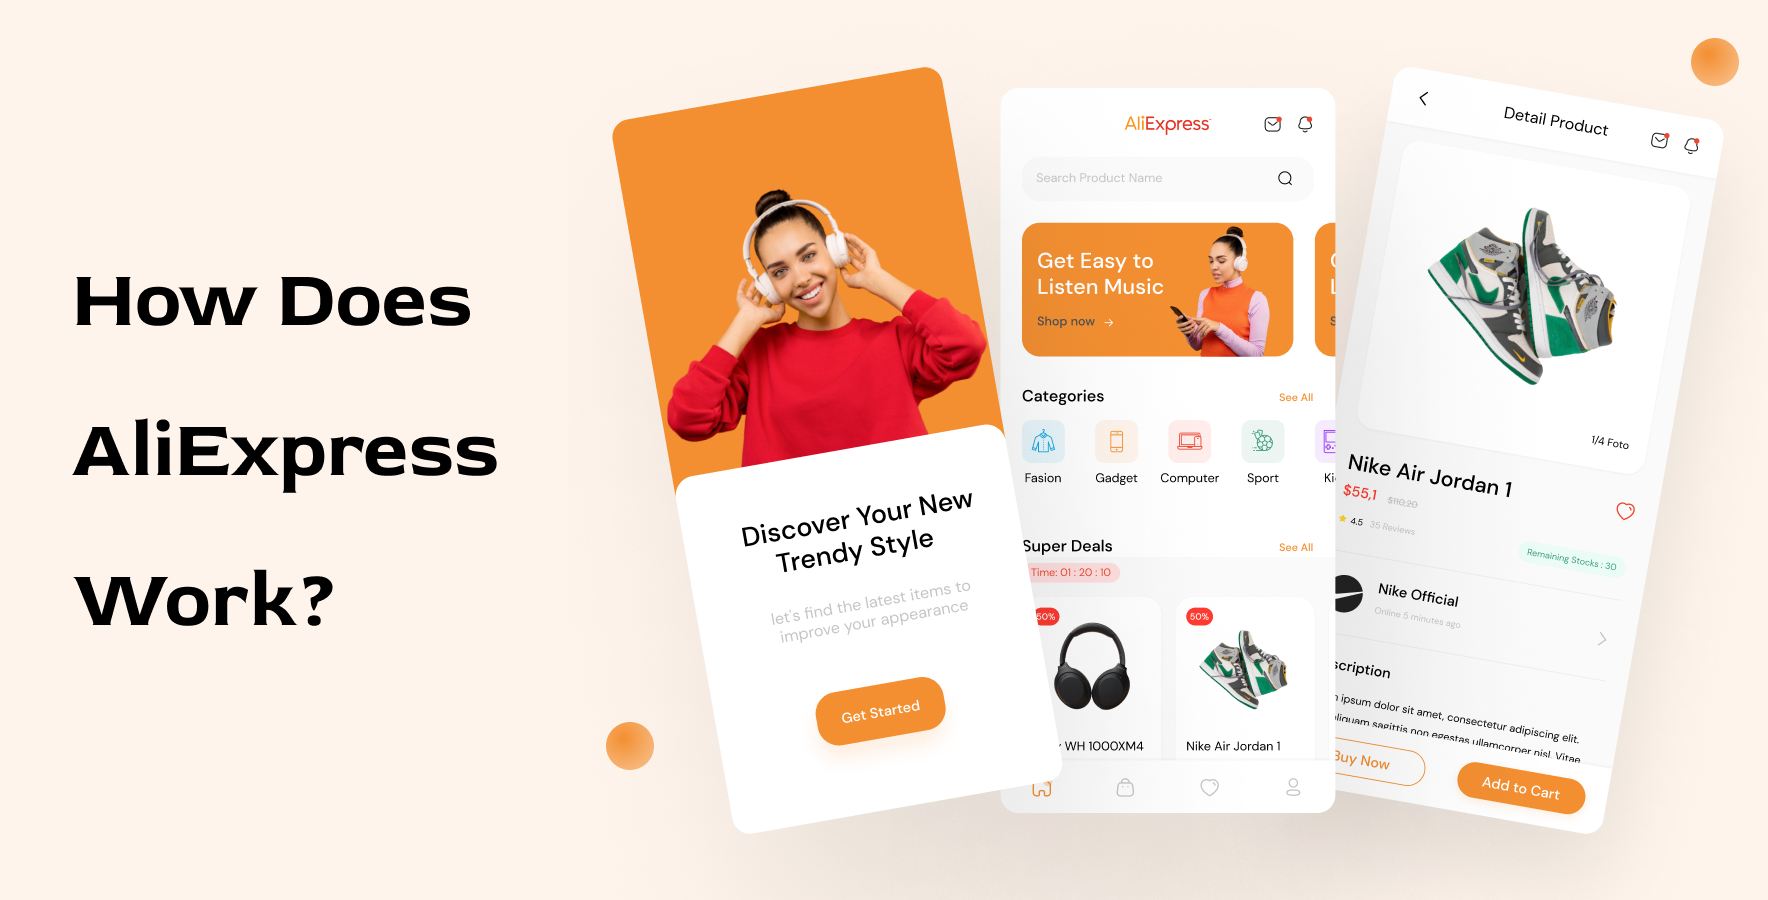 How Does AliExpress Work?